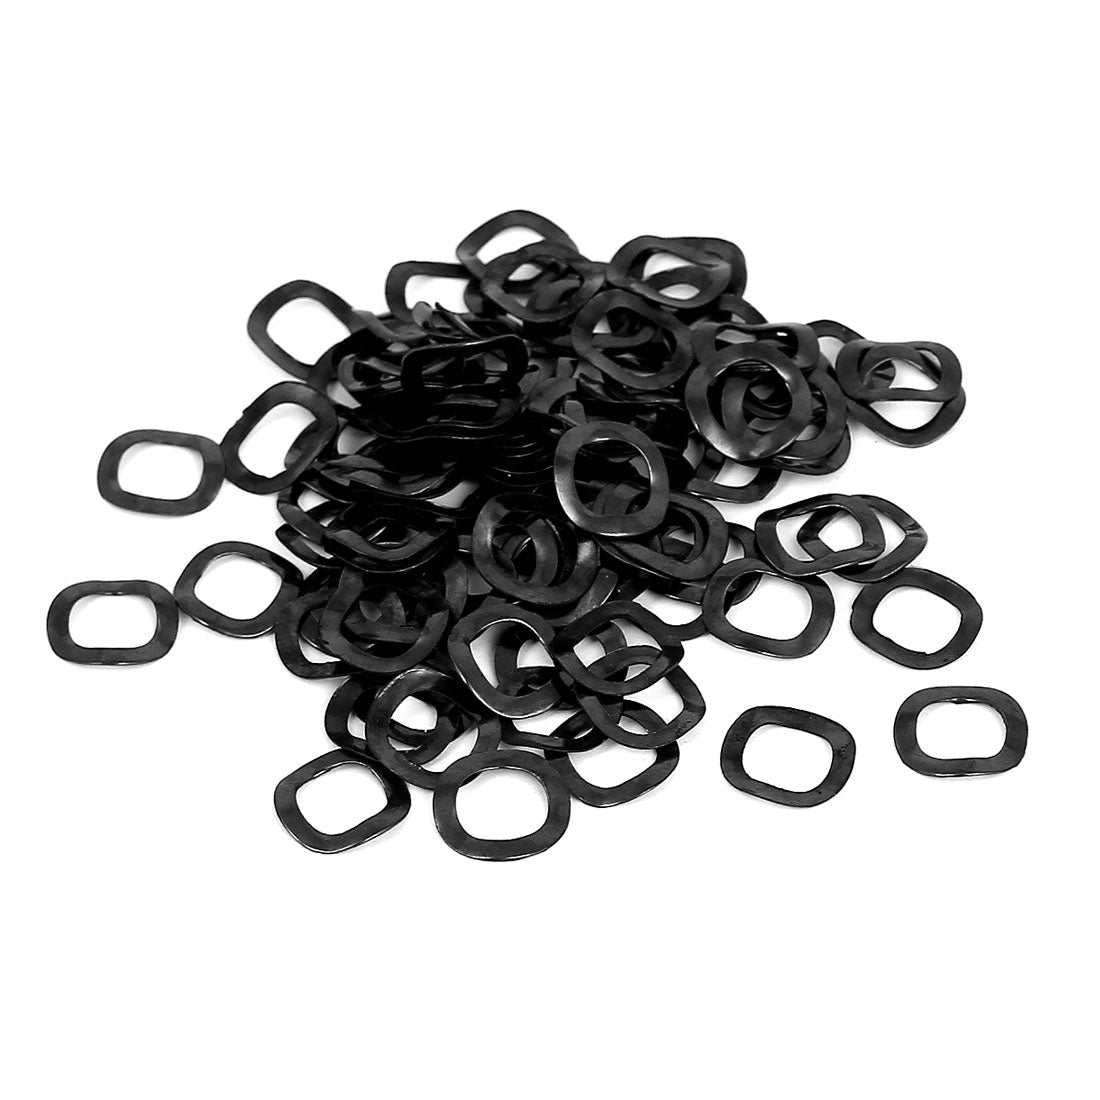 uxcell Uxcell 100pcs Black Metal Wavy Wave Crinkle Spring Washers 8mm x 13mm x 0.3mm